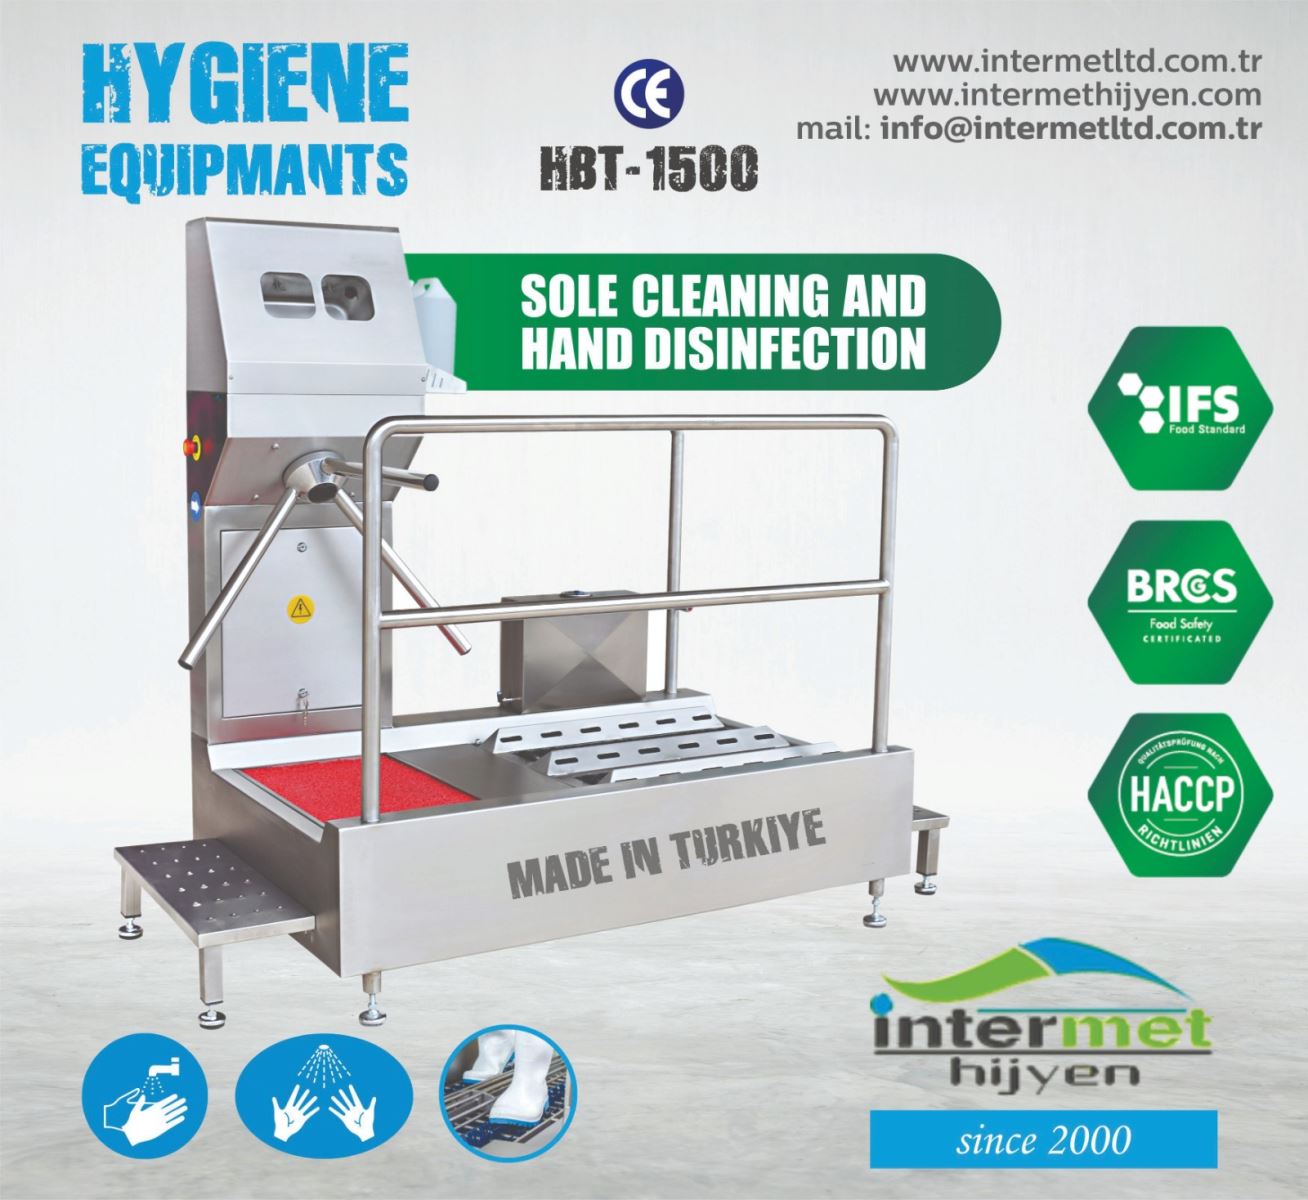 WHERE TO CONSIDER WHEN BUYING PERSONNEL HYGIENE EQUIPMENT